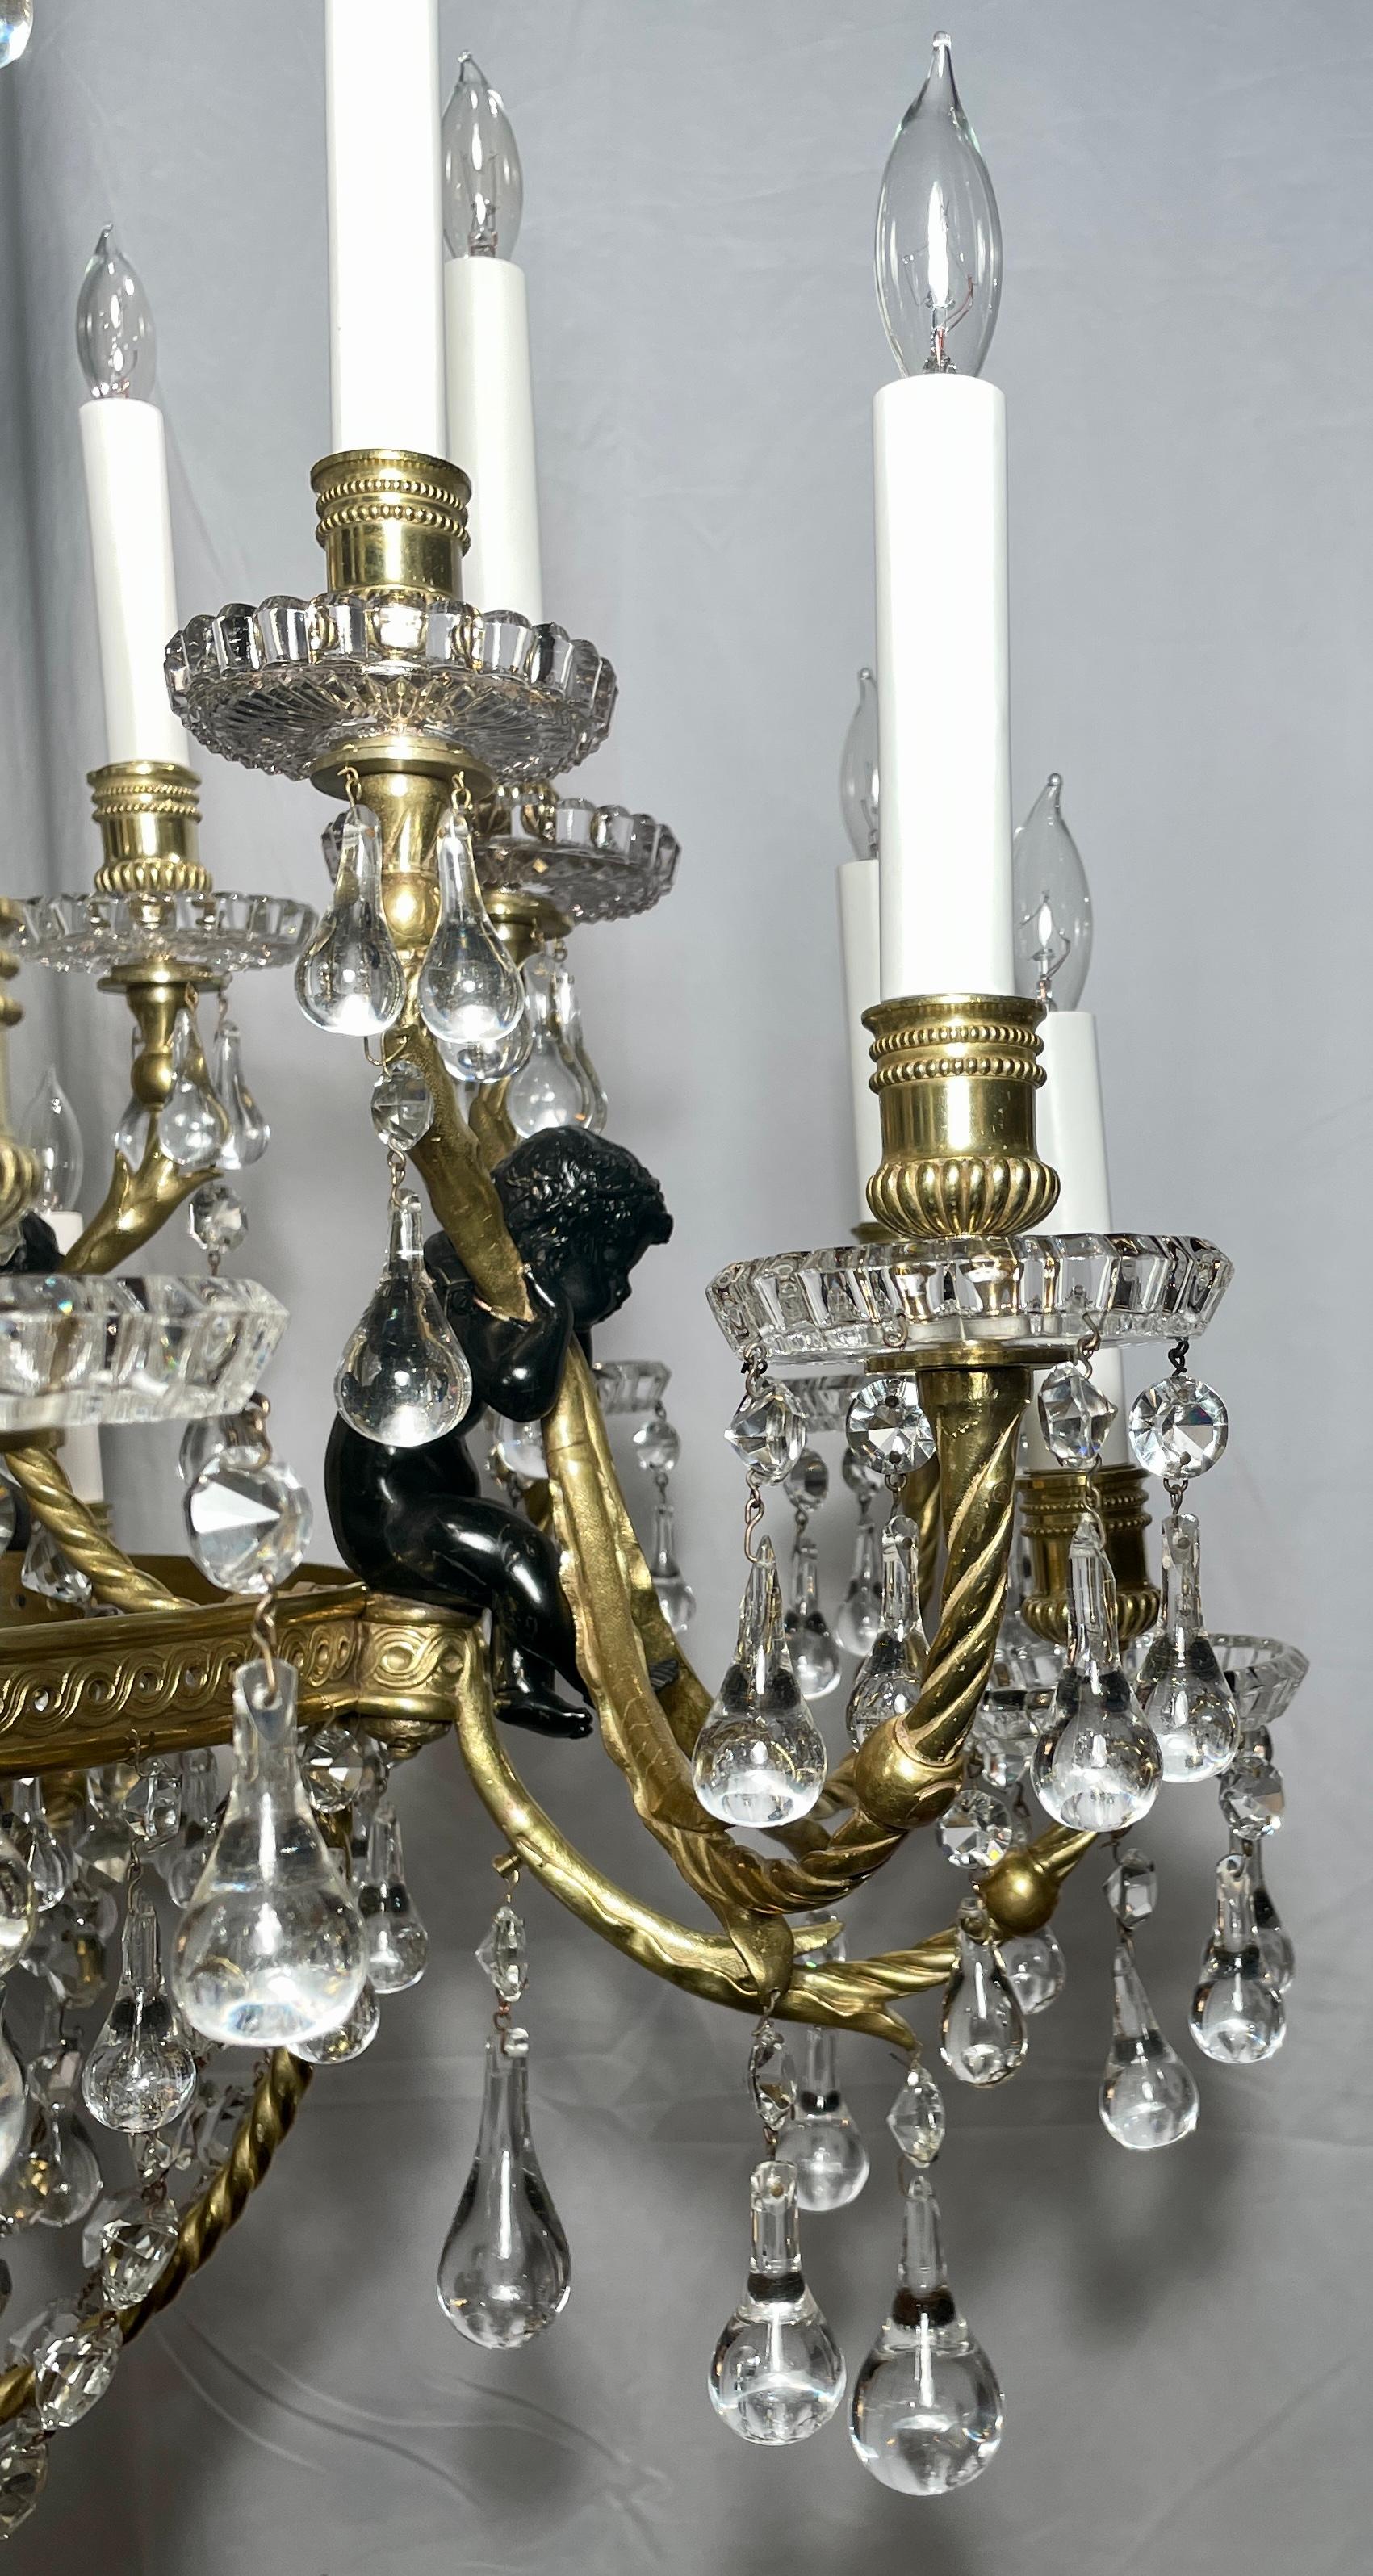 Antique French Baccarat Crystal & Bronze D'ore Chandelier, circa 1890 For Sale 2